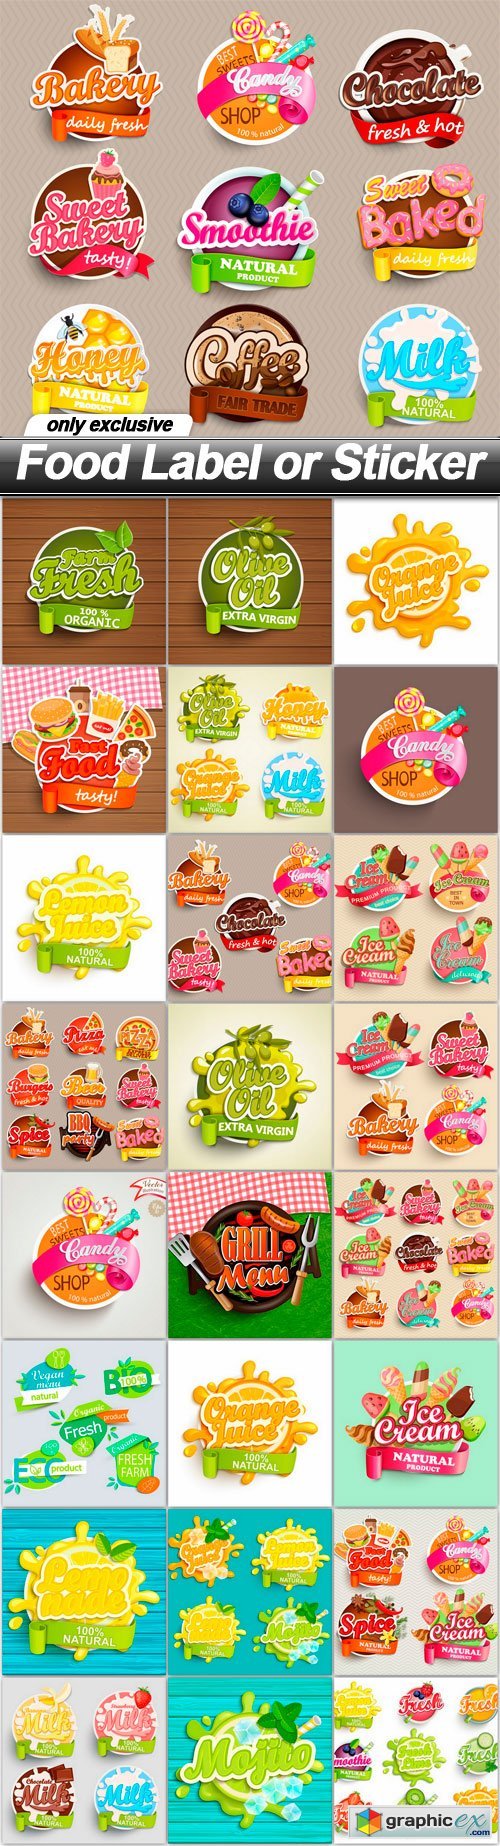 Food Label or Sticker - 25 EPS » Free Download Vector Stock Image